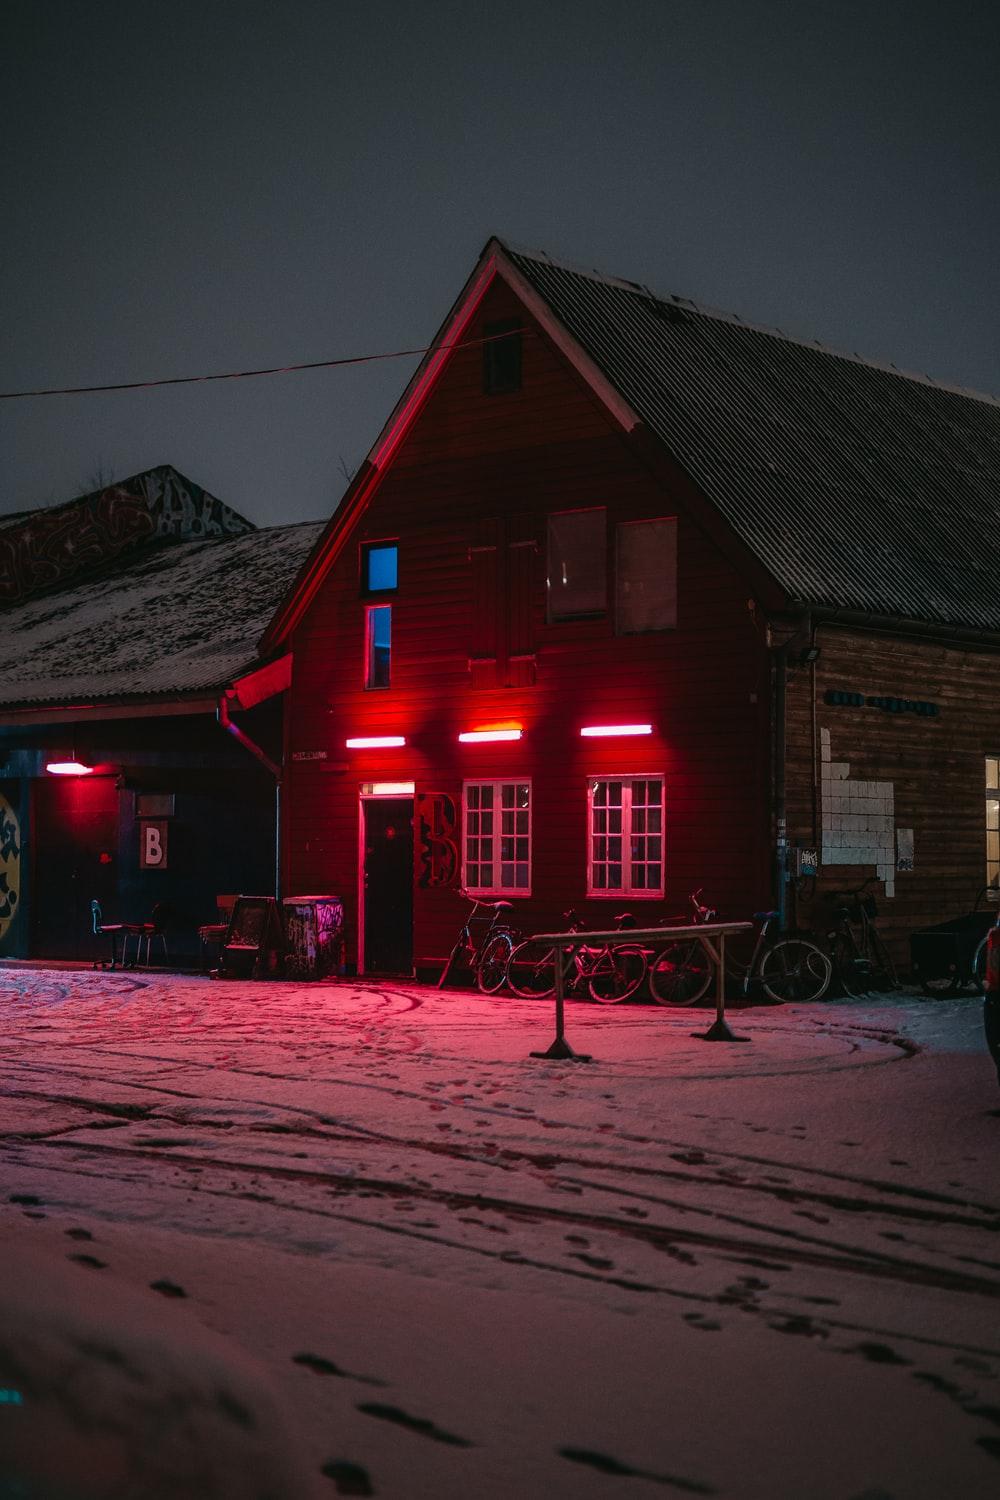 Old House In Dark Picture. Download Free Image